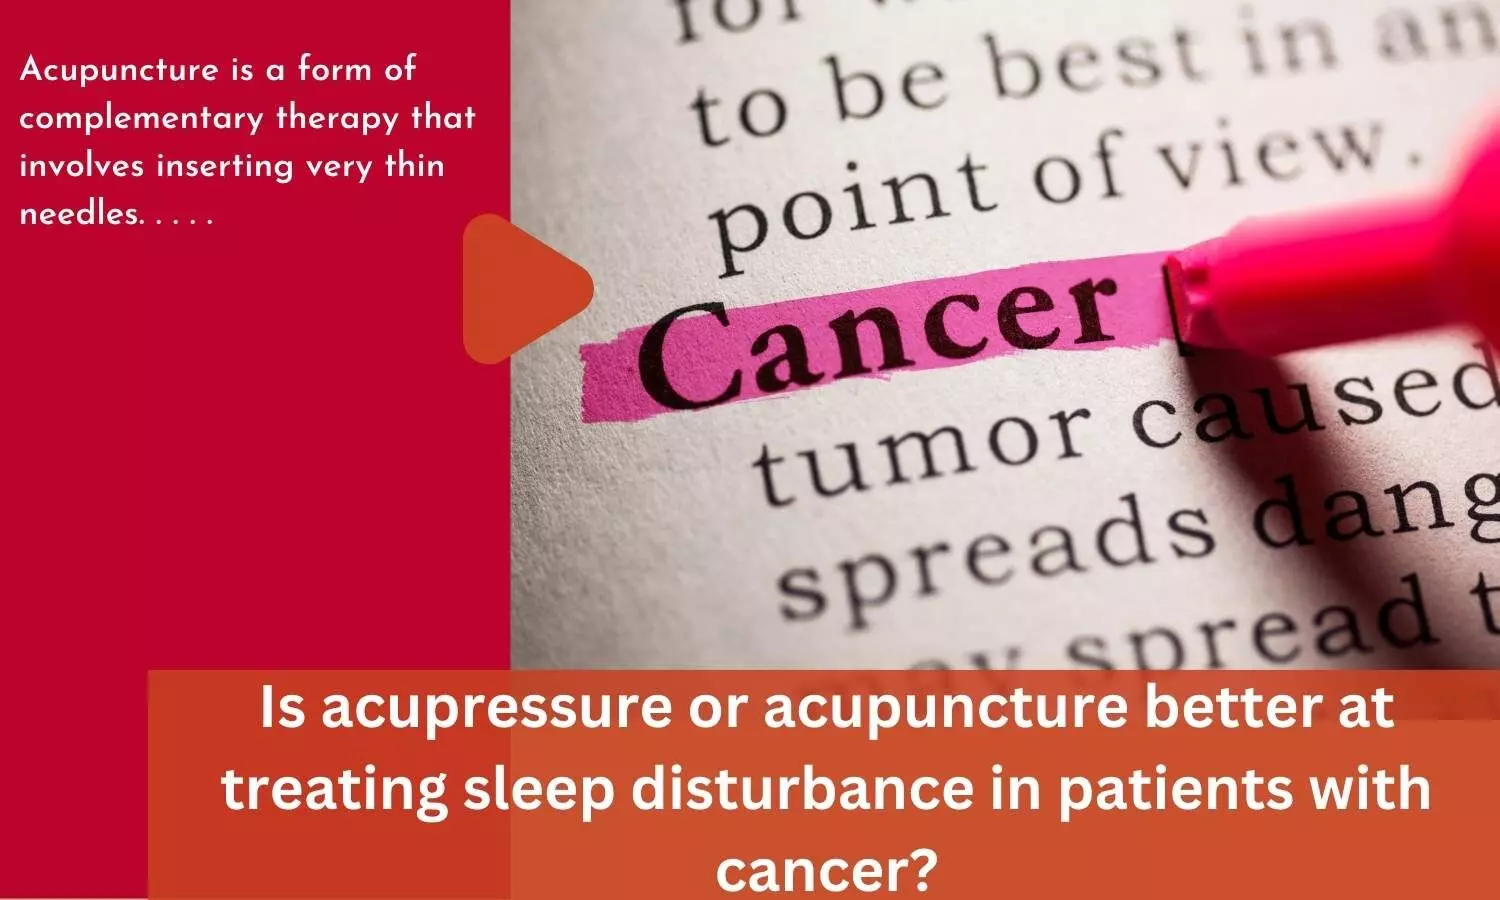 Is acupressure or acupuncture better at treating sleep disturbance in patients with cancer?